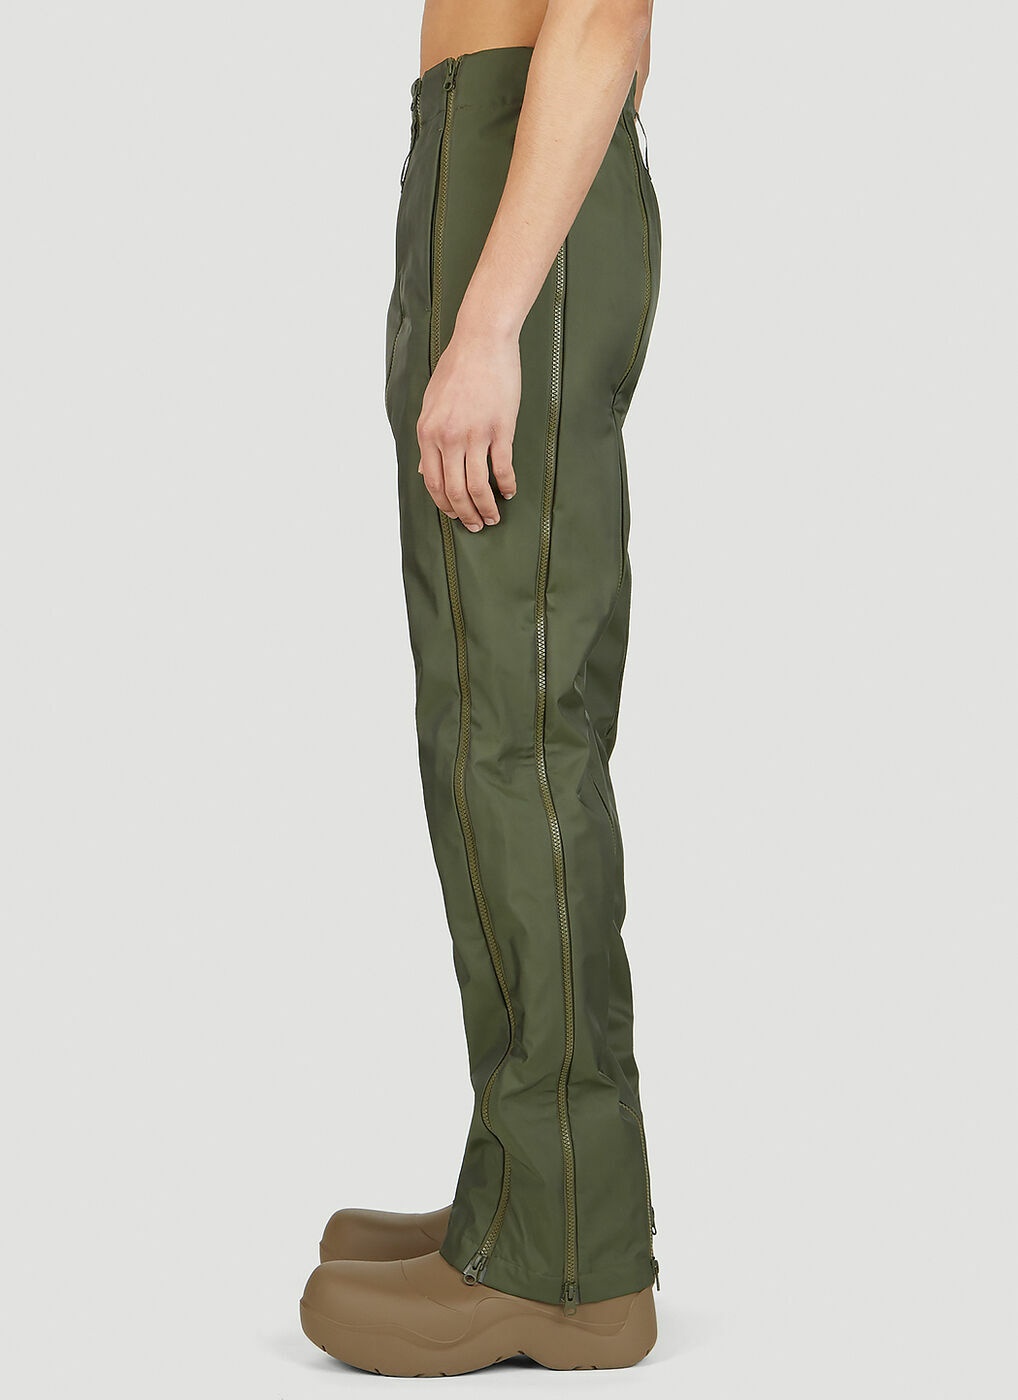 5.0 Technical Pants Center in Green Post Archive Faction